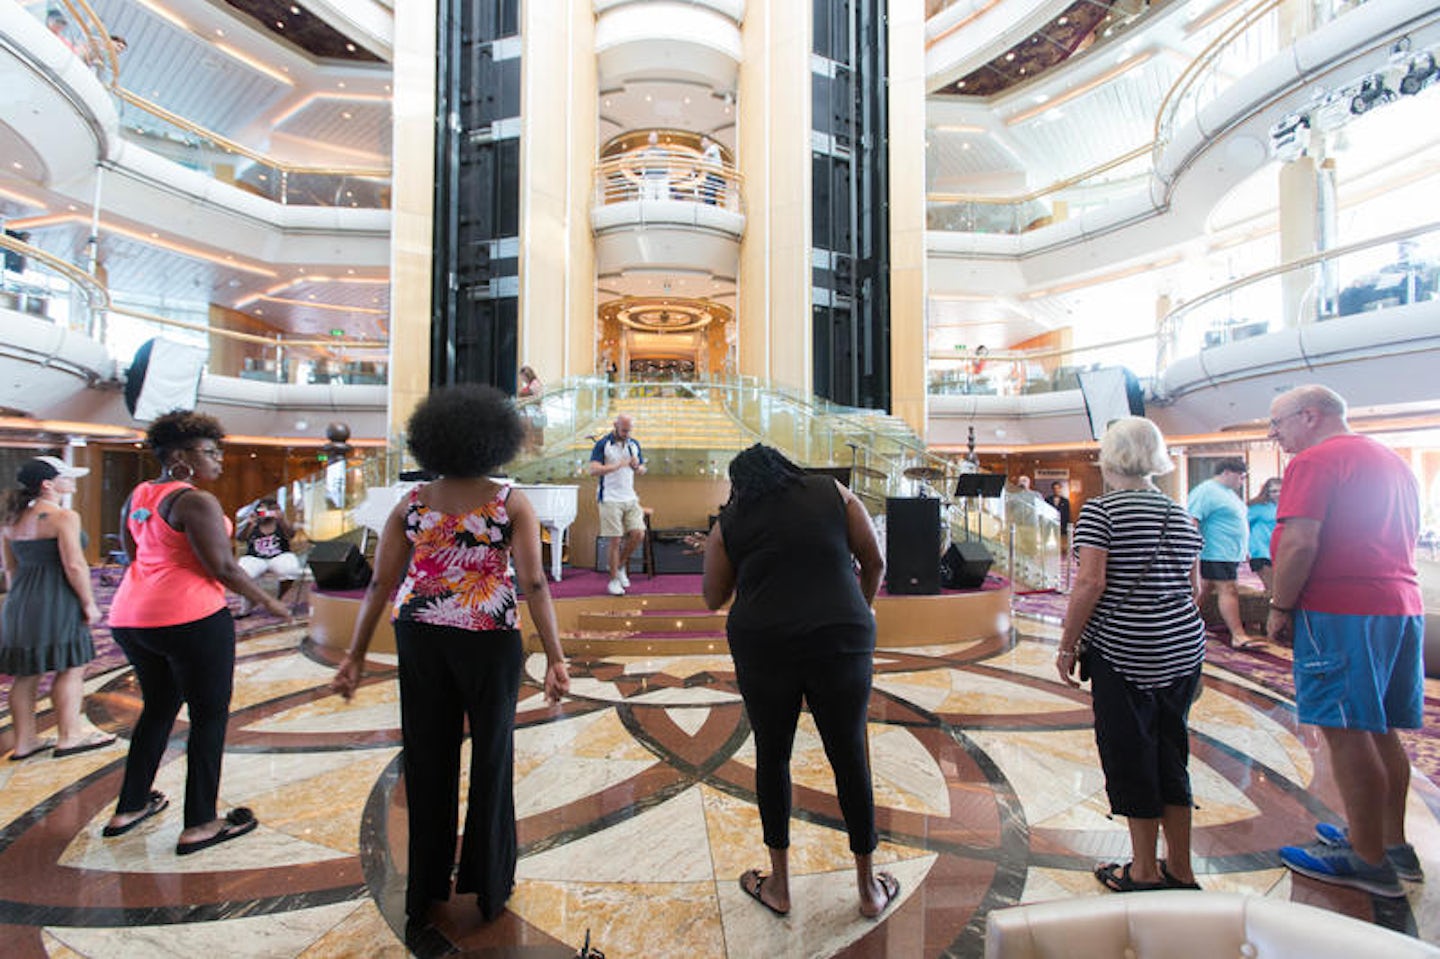 70s Line Dance Class on Enchantment of the Seas